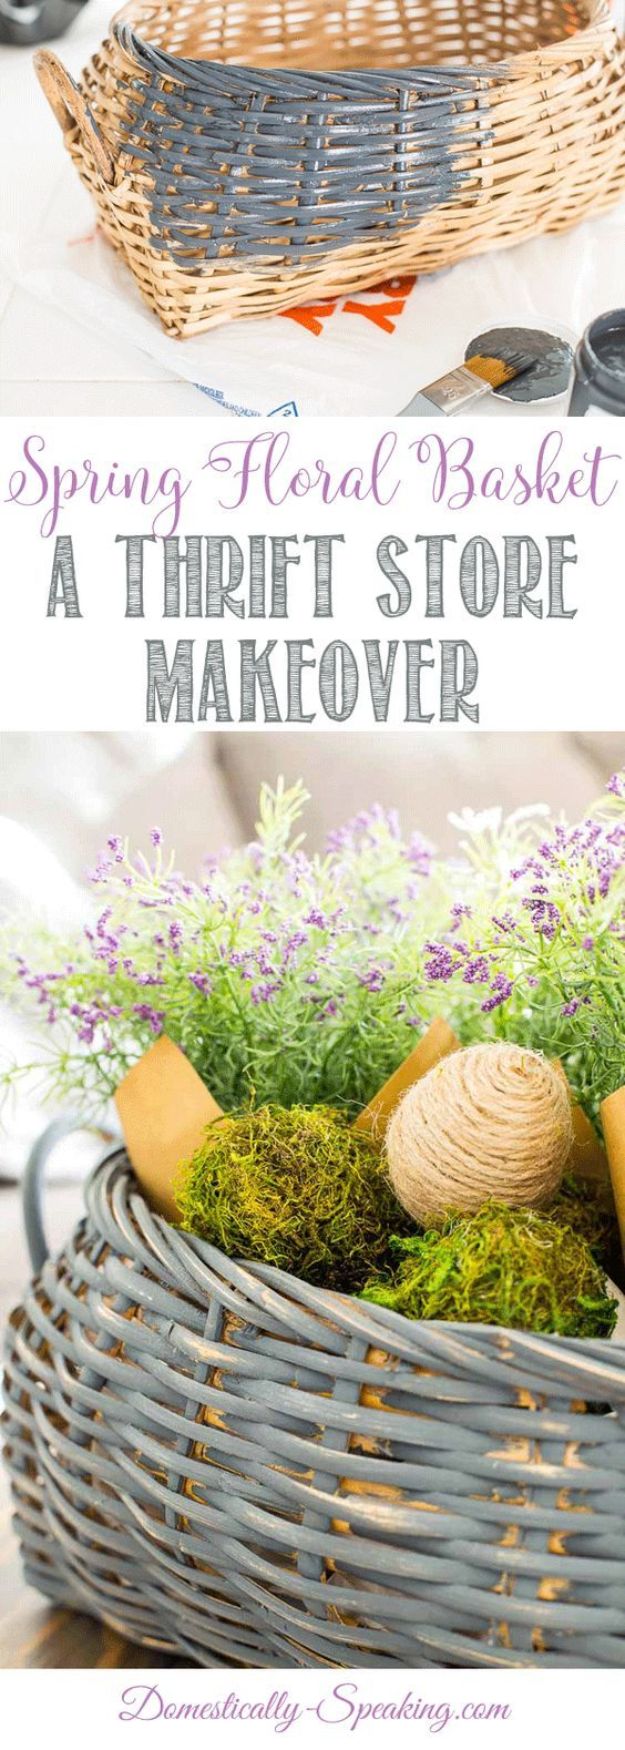 Thrift Store DIY Makeovers - Floral Basket Thrift Store Makeover - Decor and Furniture With Upcycling Projects and Tutorials - Room Decor Ideas on A Budget - Crafts and Decor to Make and Sell - Before and After Photos - Farmhouse, Outdoor, Bedroom, Kitchen, Living Room and Dining Room Furniture http://diyjoy.com/thrift-store-makeovers